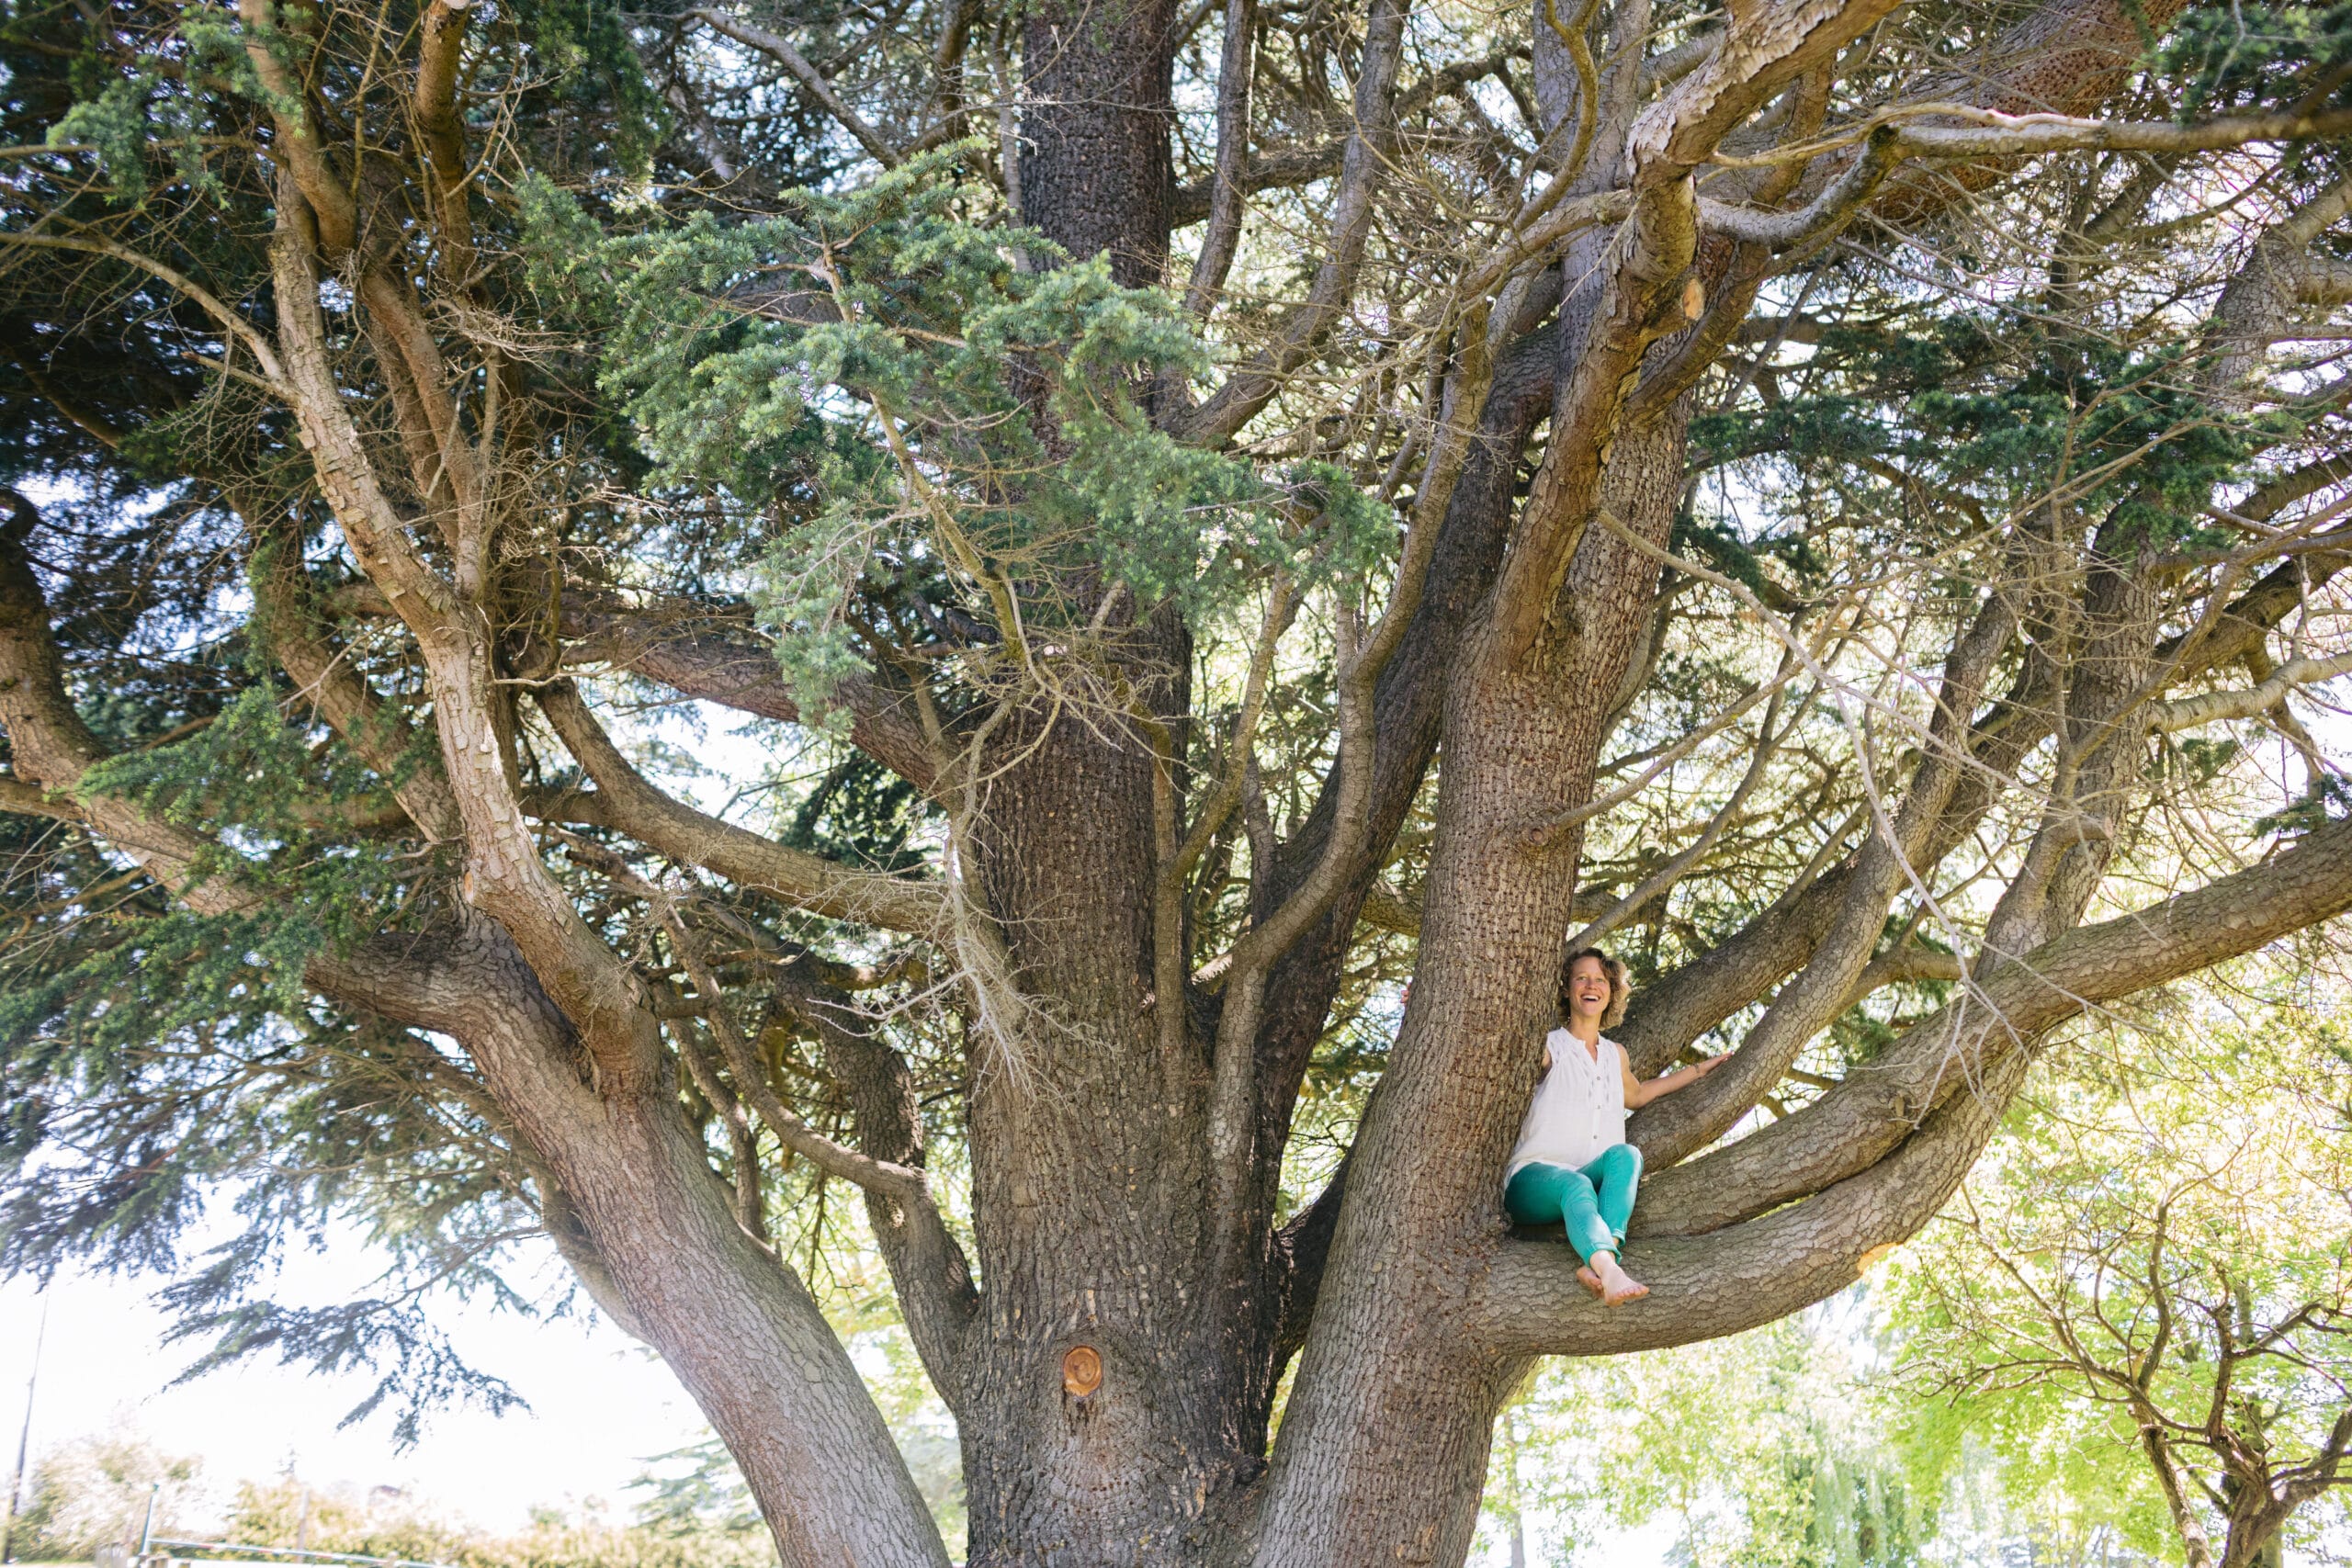 Sarah Sue climbs a giant cedar tree near her Bellingham home, smiling in awe of its shape, legacy, and potent medicine.